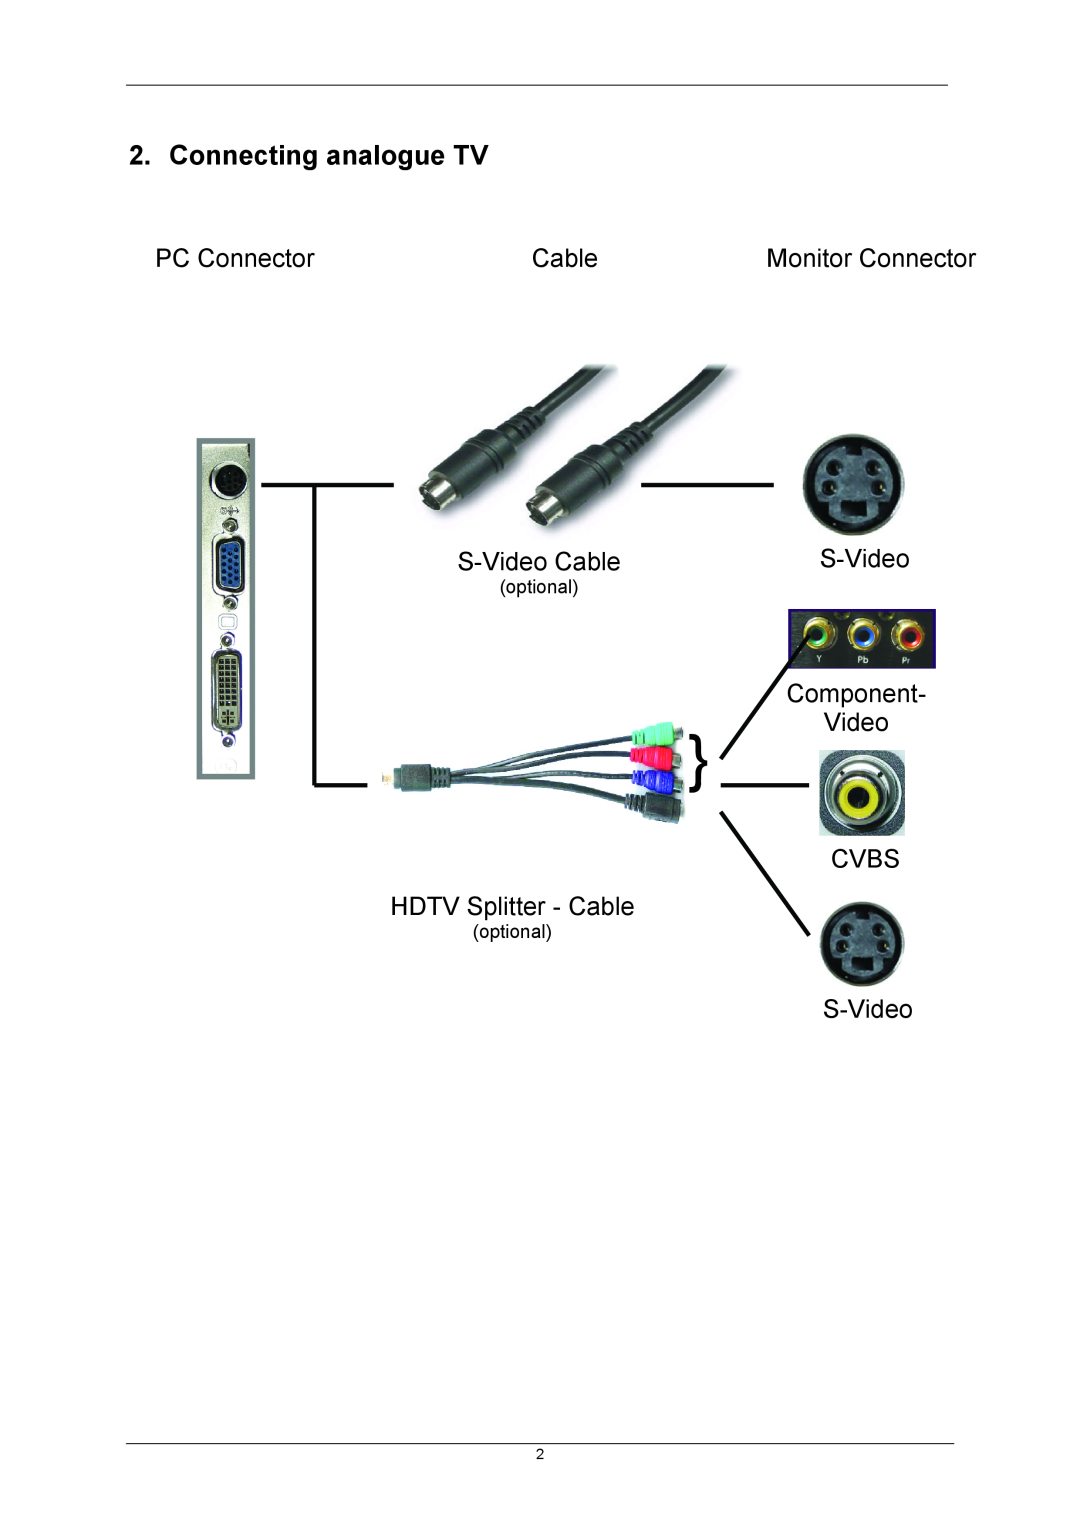 Nvidia 8400GS manual Connecting analogue TV, Component, HDTV Splitter - Cable, Video CVBS, S-Video Cable, optional 